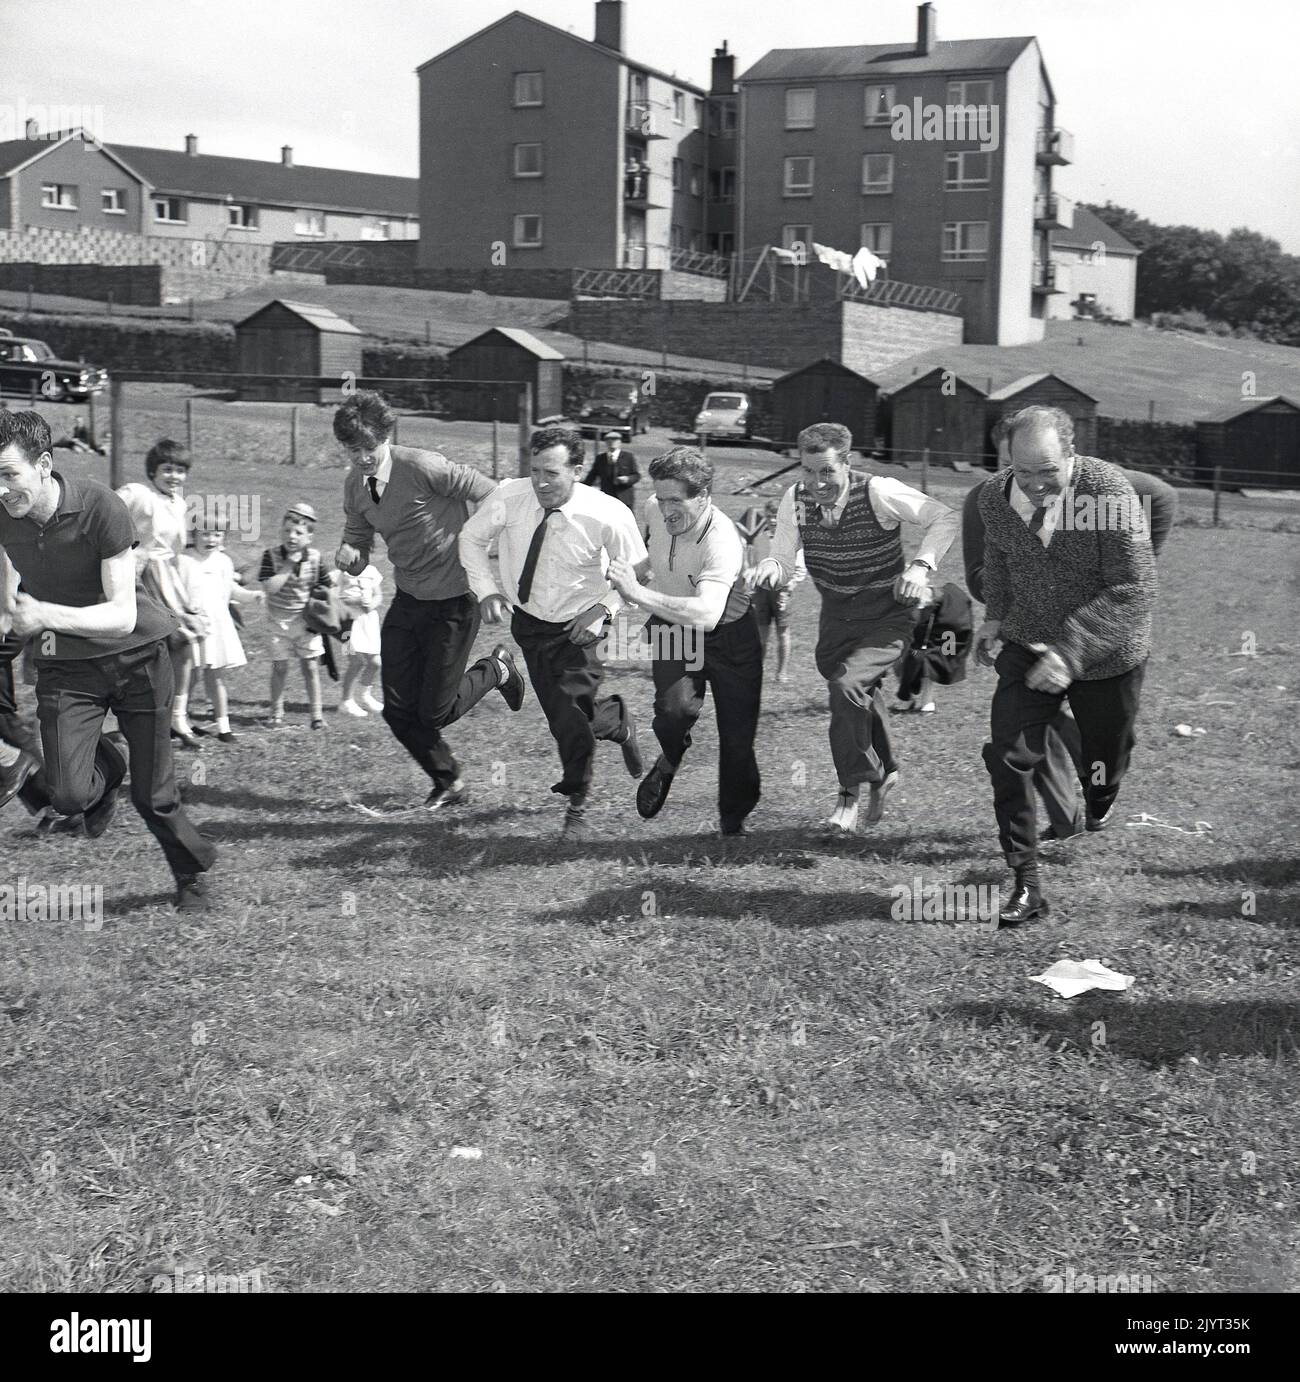 1965, historical, adult men taking part in a running competition in a field at a housing estate in North Queensferry, Fife, Scotland, UK, as part of the North Queensferry gala day, a day of community activities for the residents. Stock Photo